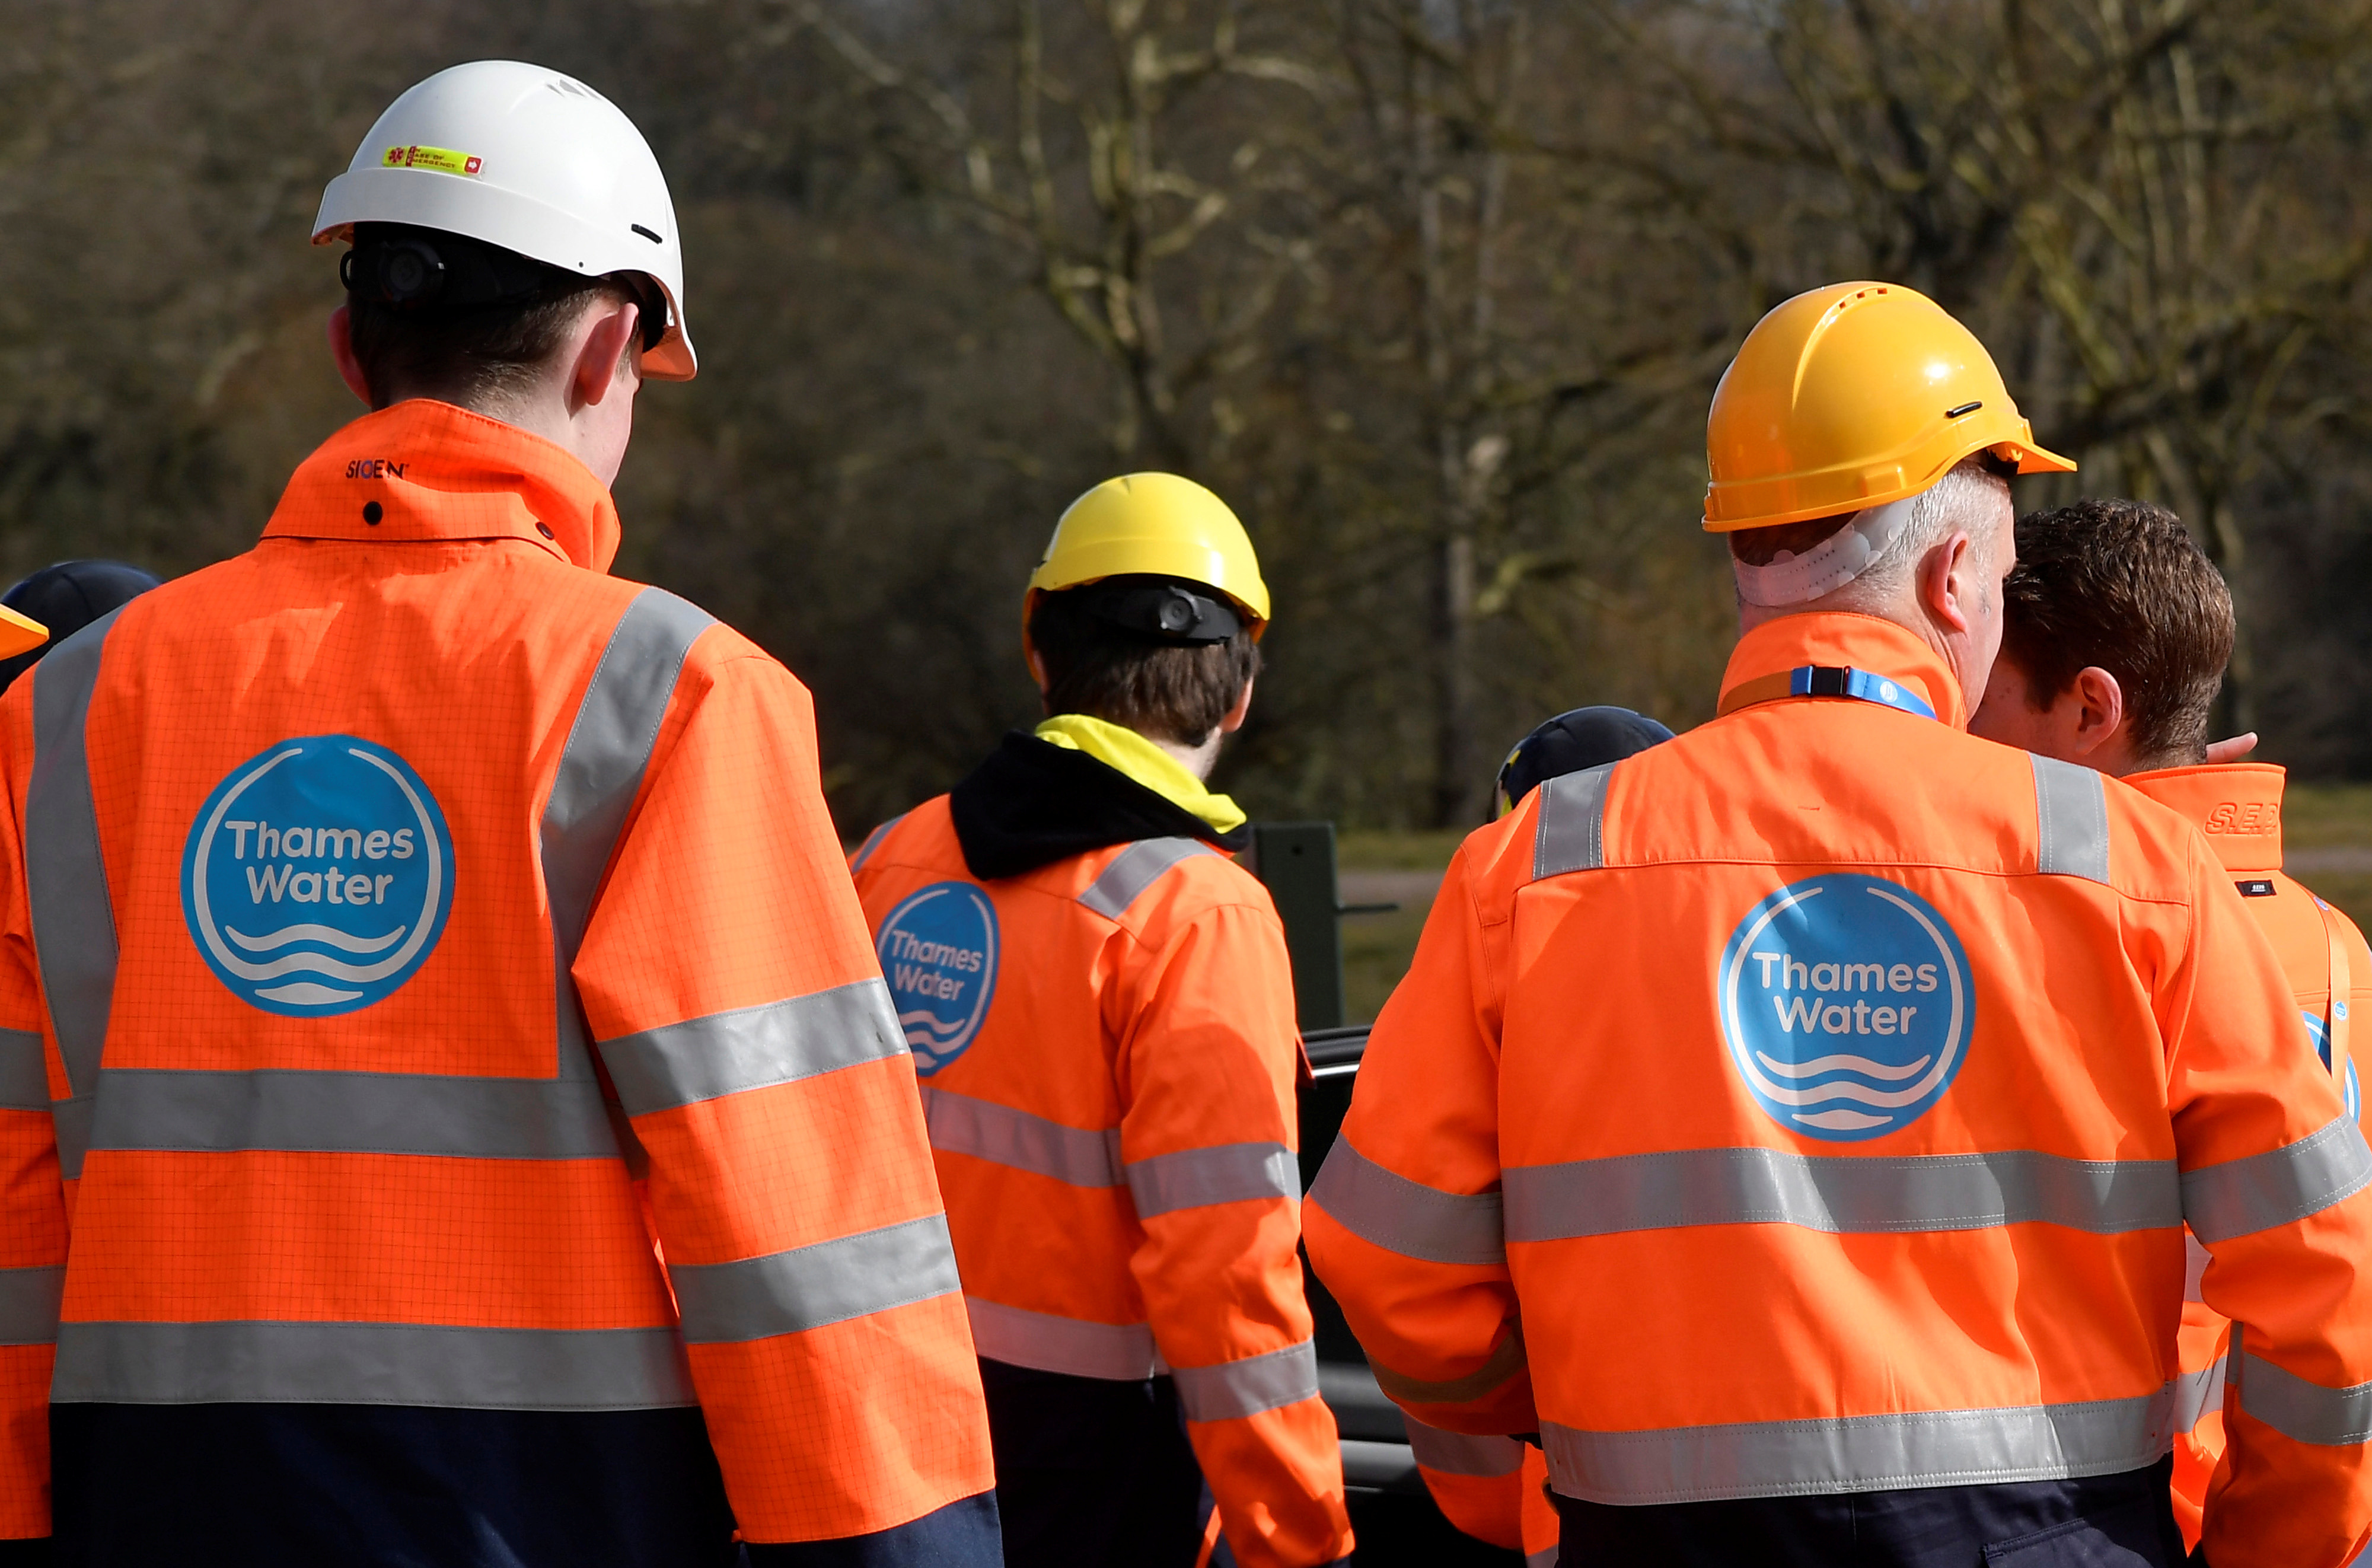 Thames Water operatives are seen at a water distribution site in Hampstead in London, Britain